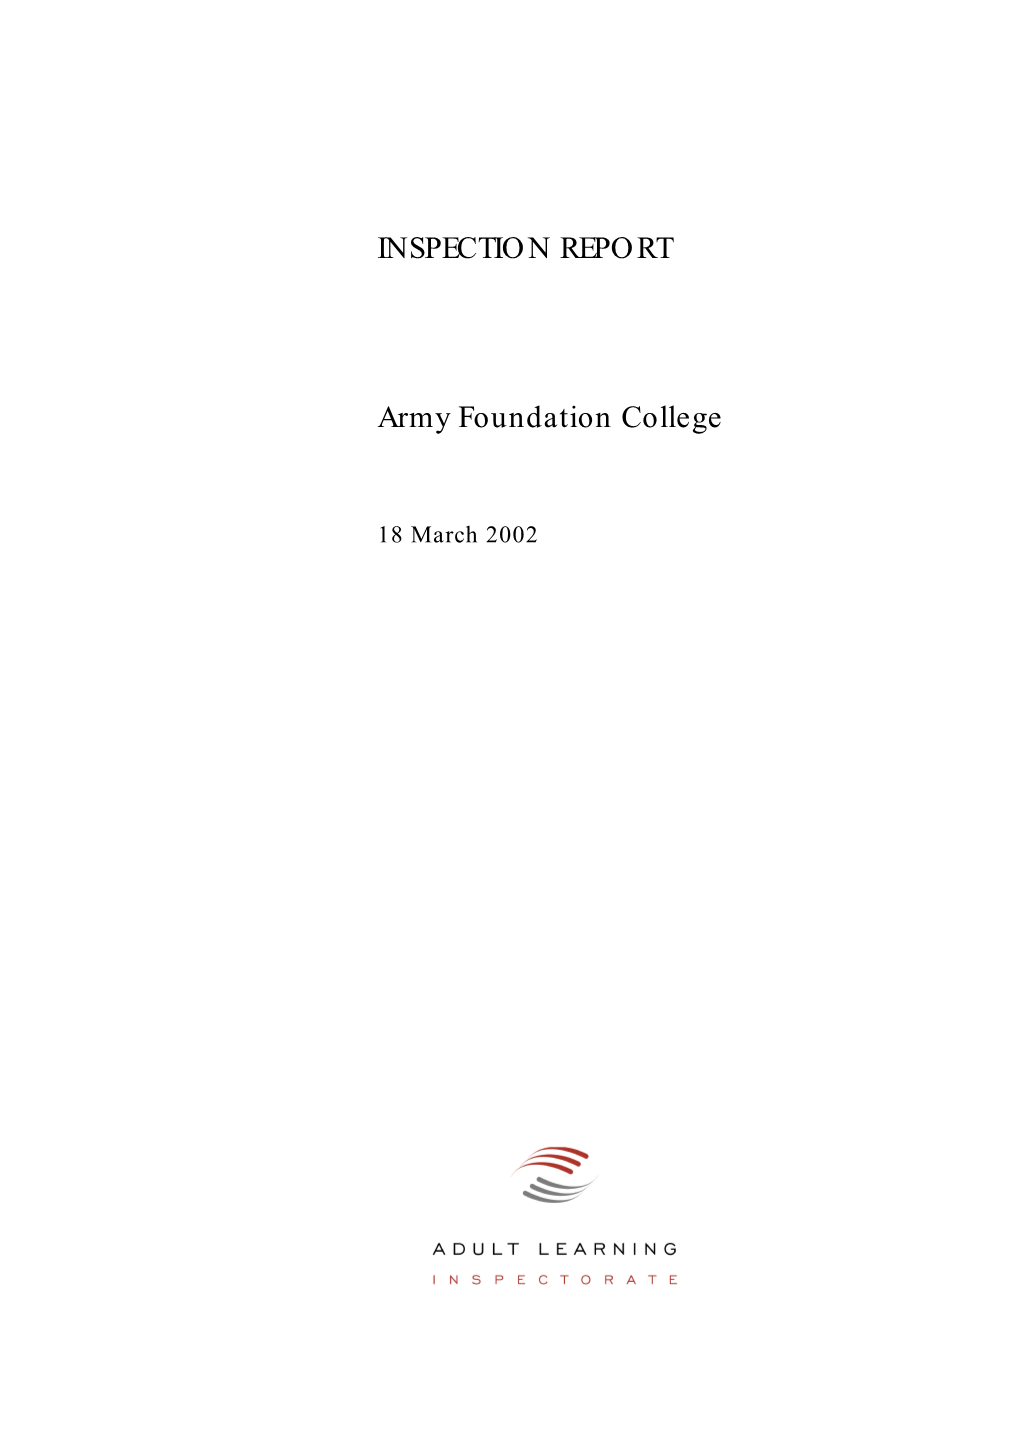 Army Foundation College INSPECTION REPORT